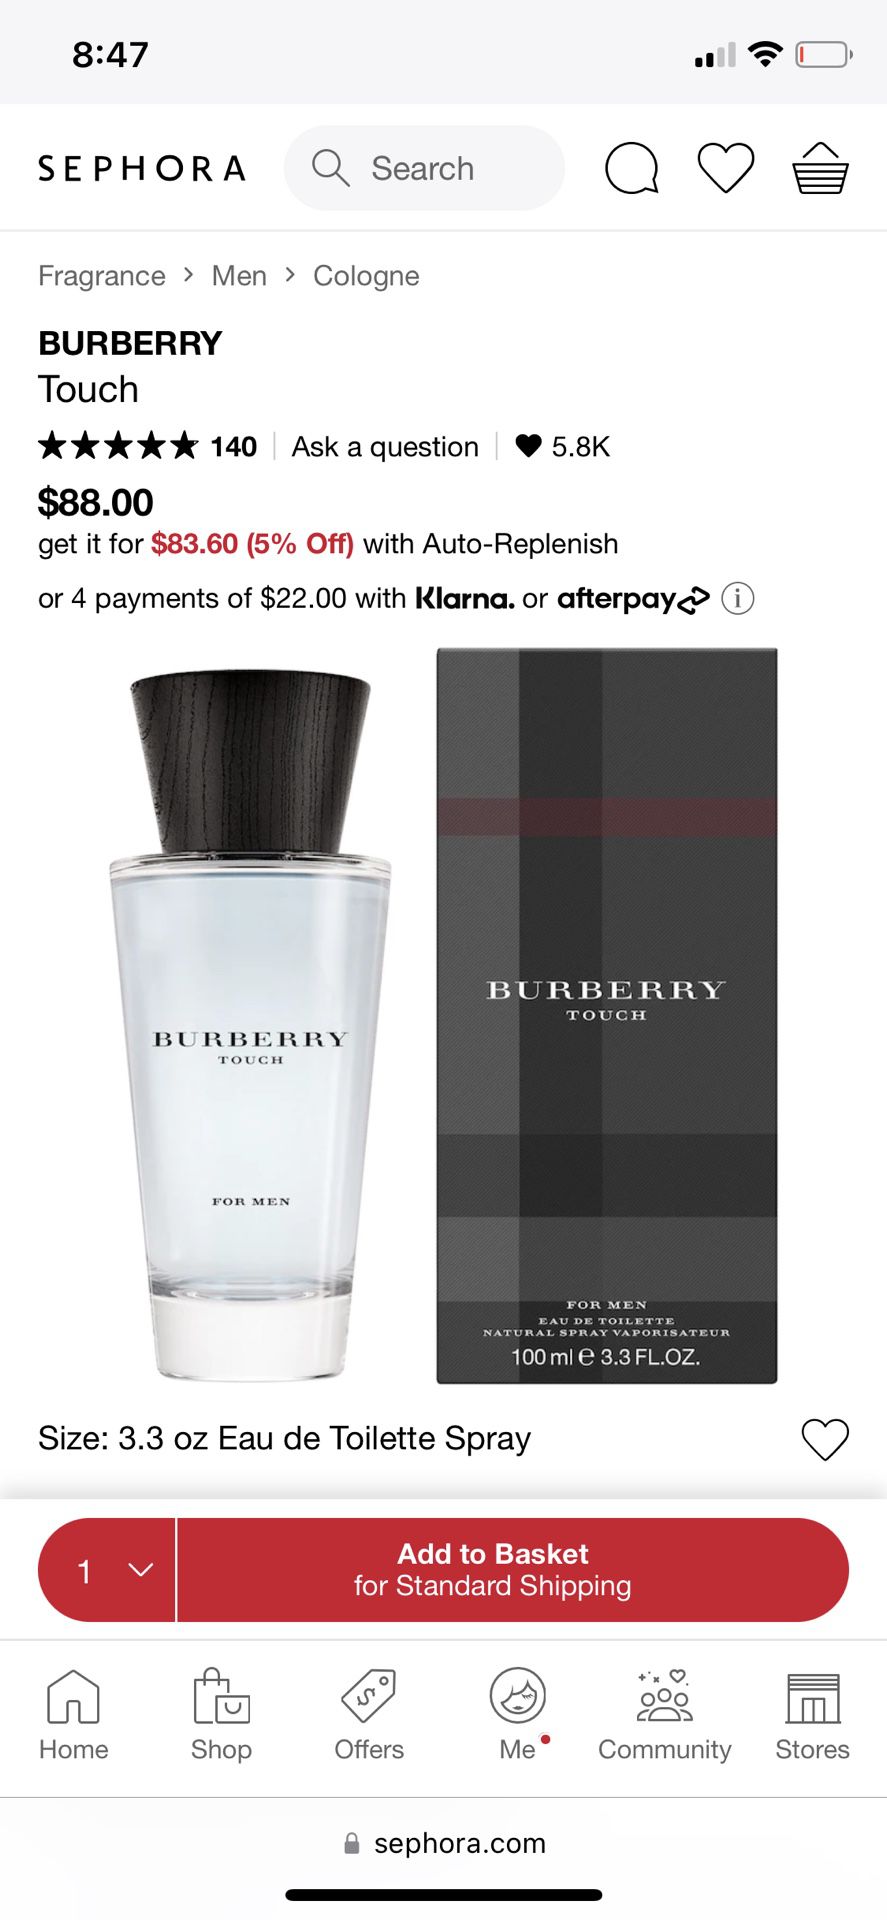 NEW SEALED IN BOX BURBERRY TOUCH 3.3oz COLOGNE